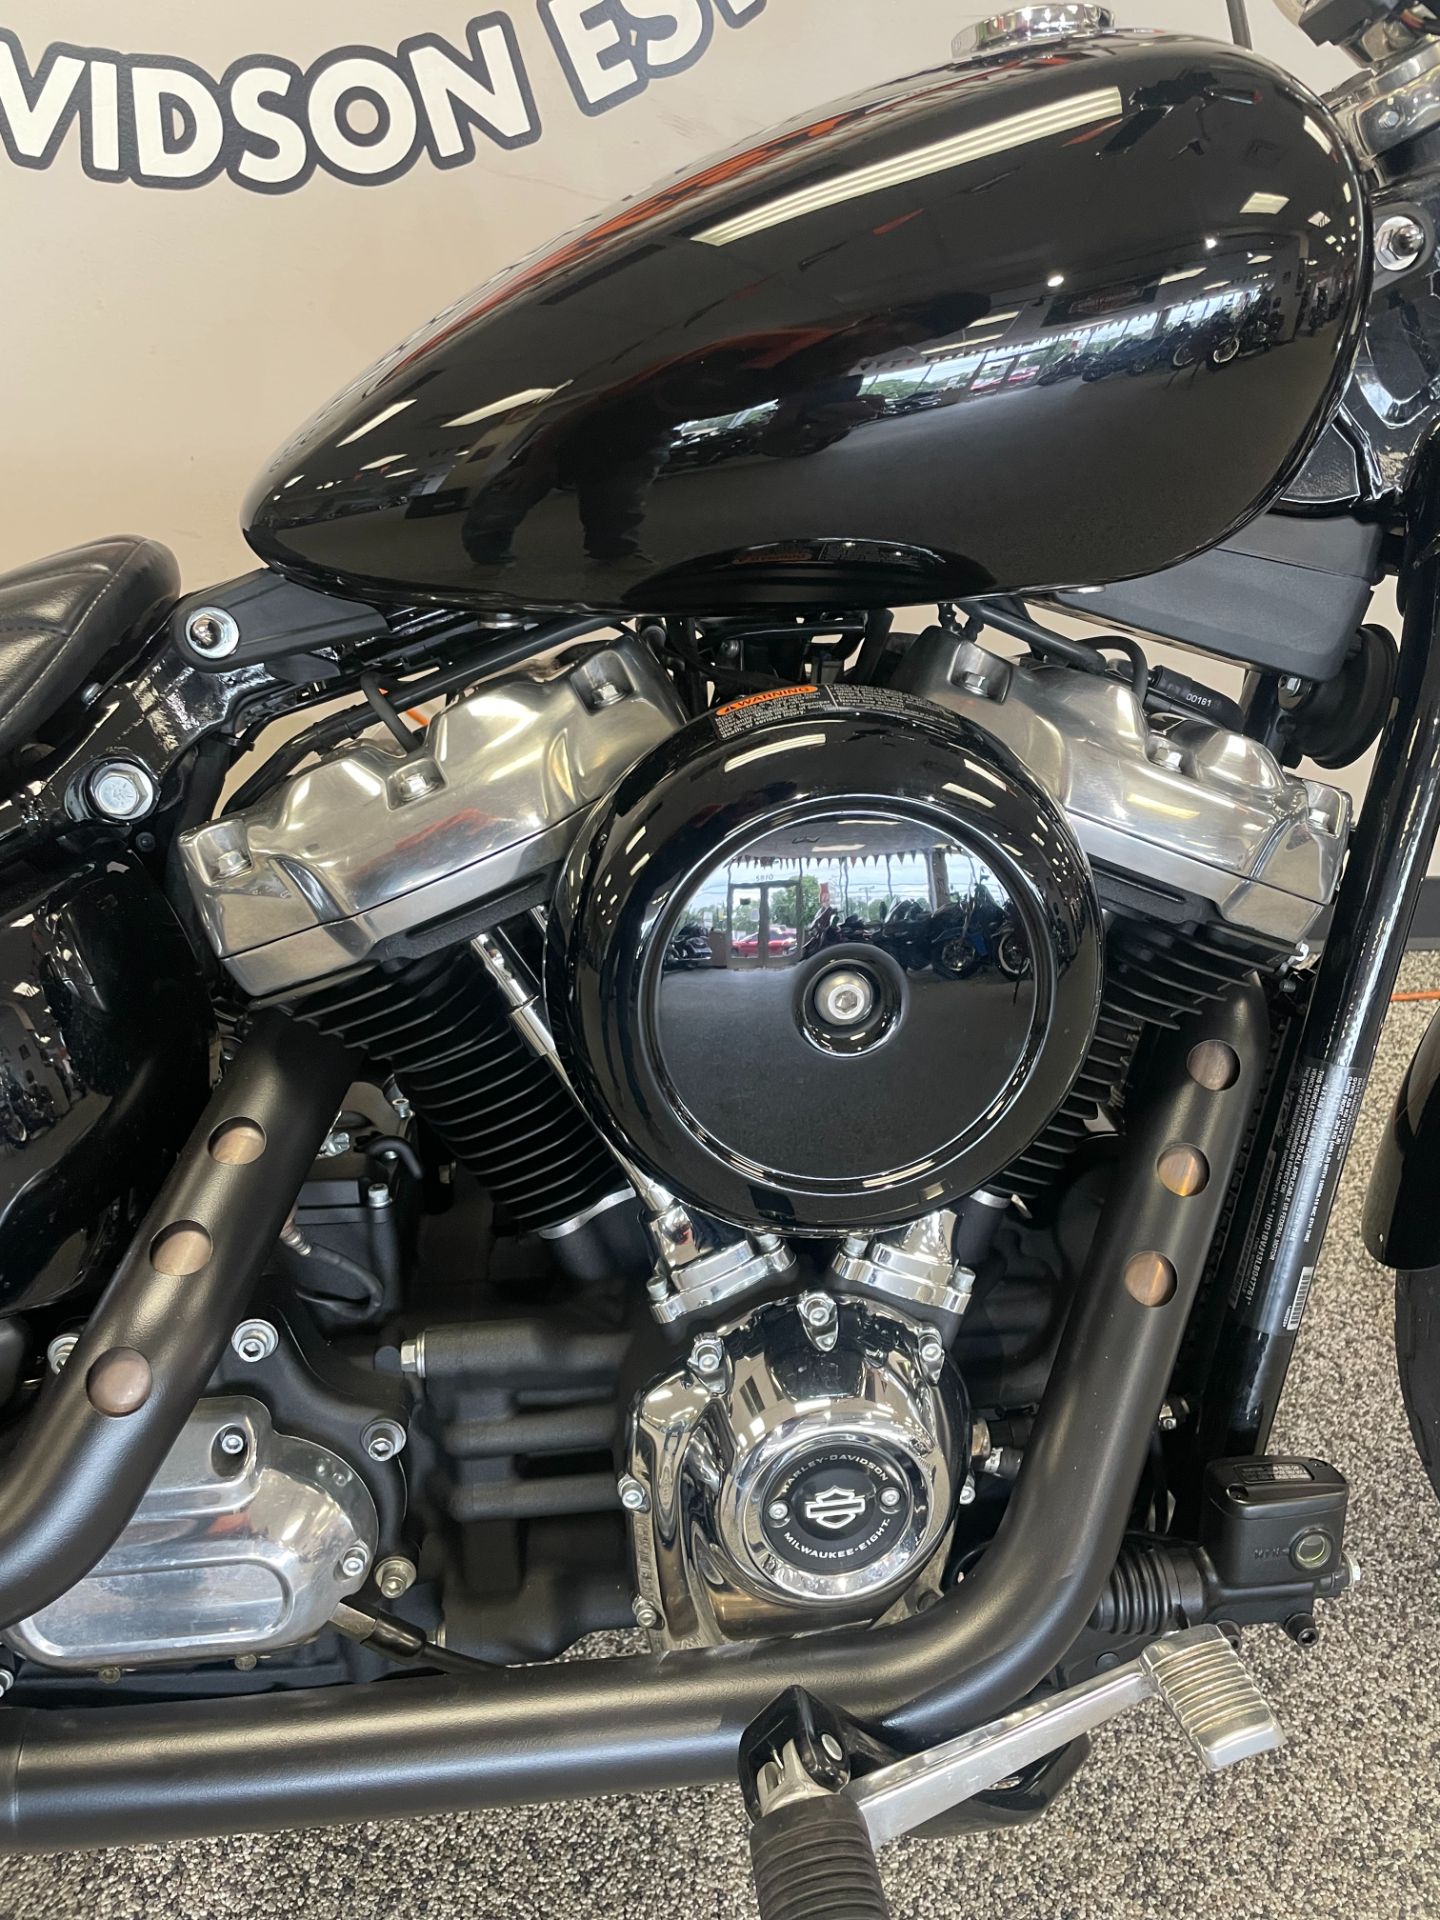 2020 Harley-Davidson SOFTAIL STANDARD in Knoxville, Tennessee - Photo 2